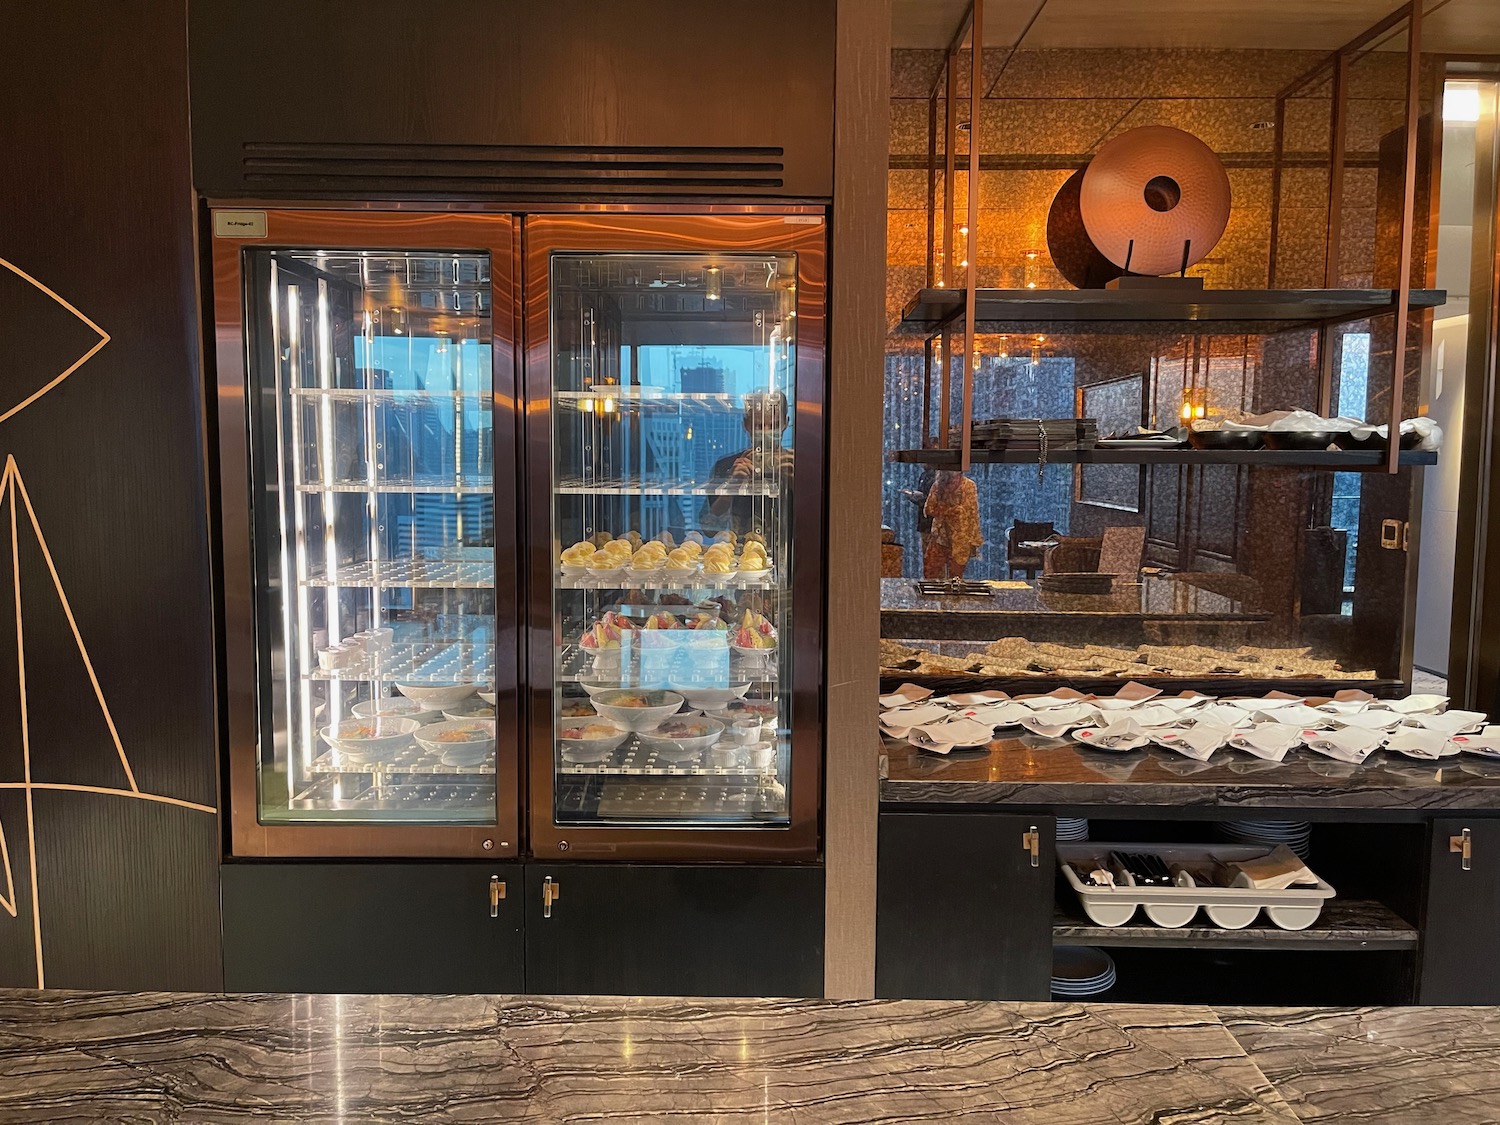 a display case with food on shelves